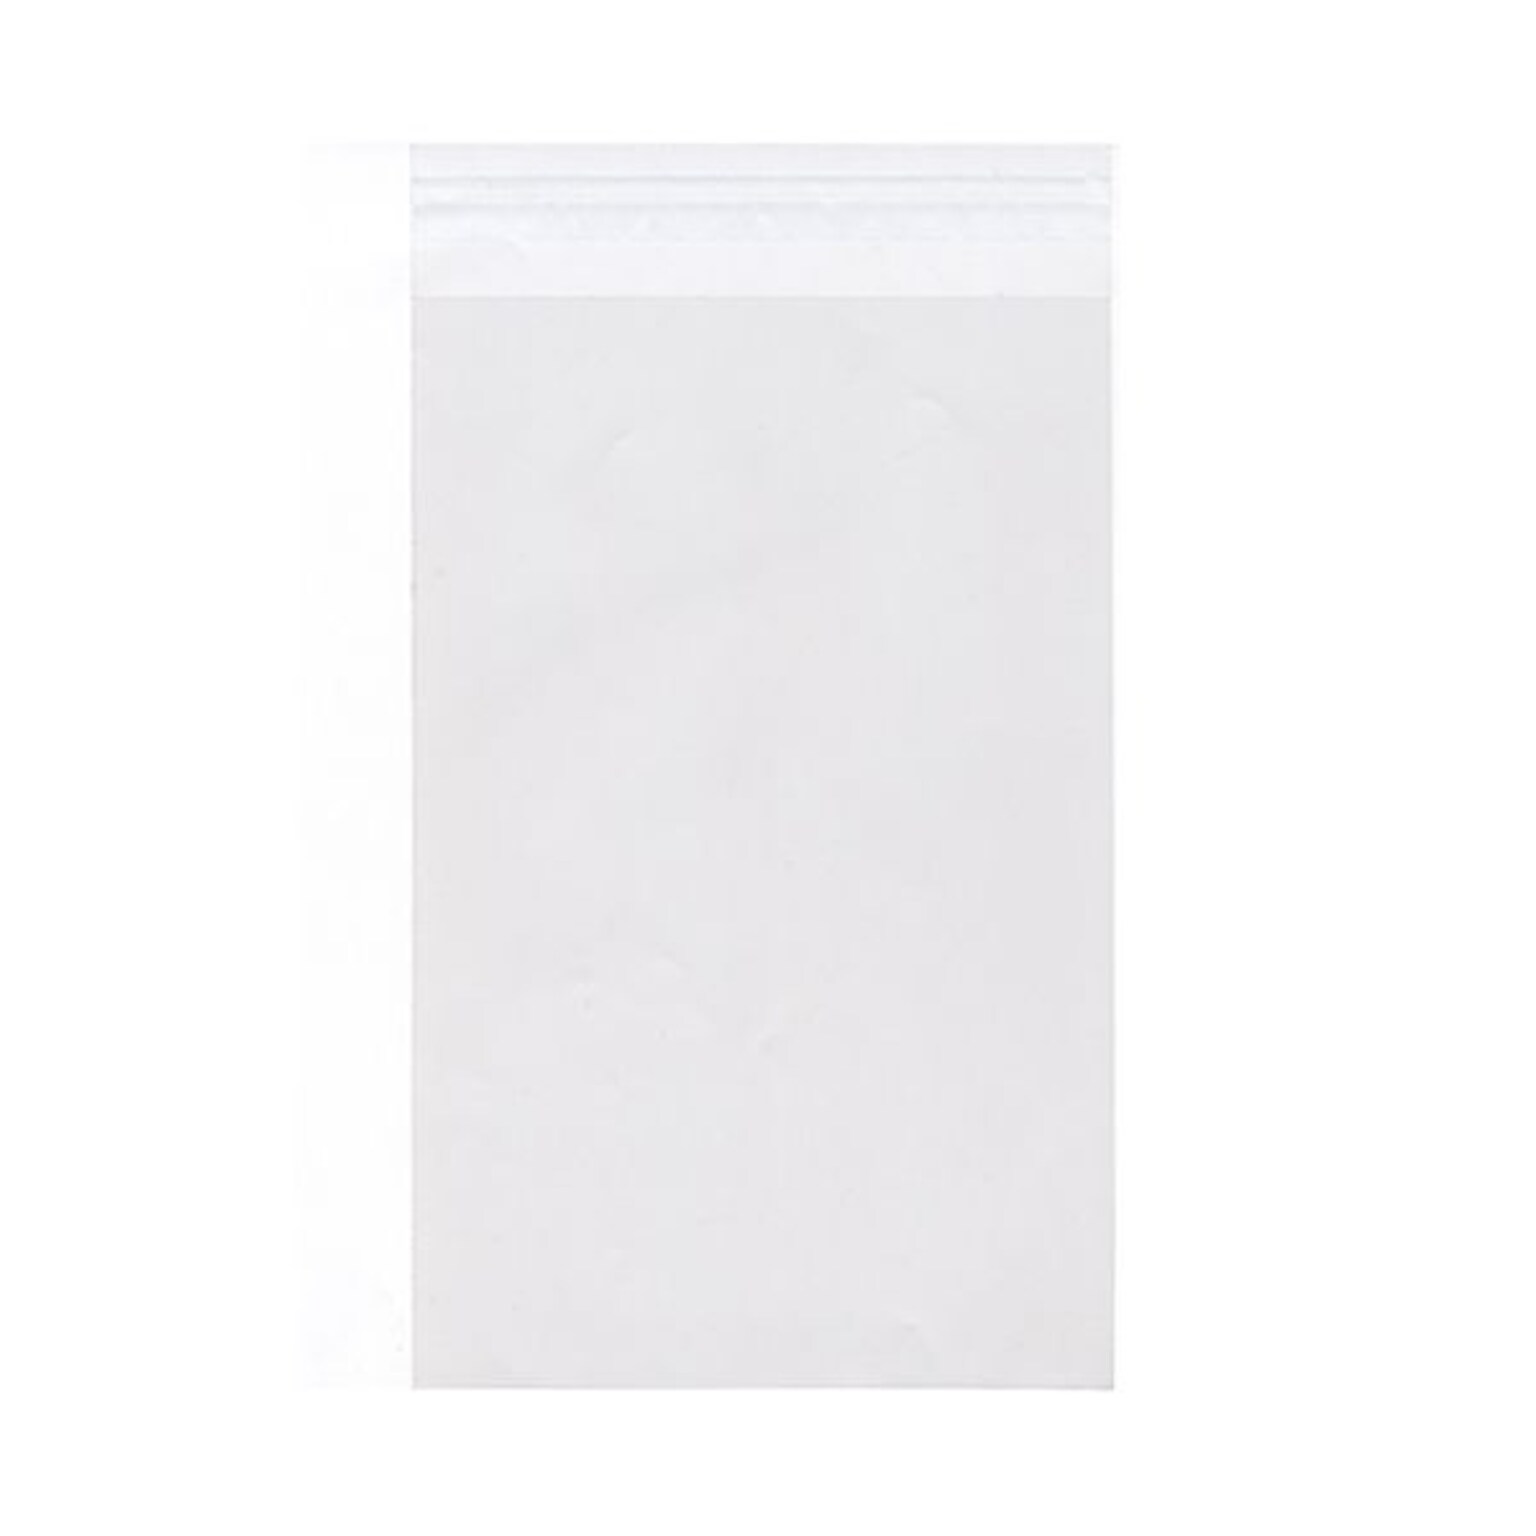 JAM Paper Cello Sleeves with Peel & Seal Closure, 16.4375 x 20.125, Clear, 1000/Carton (16.520125CELLOB)